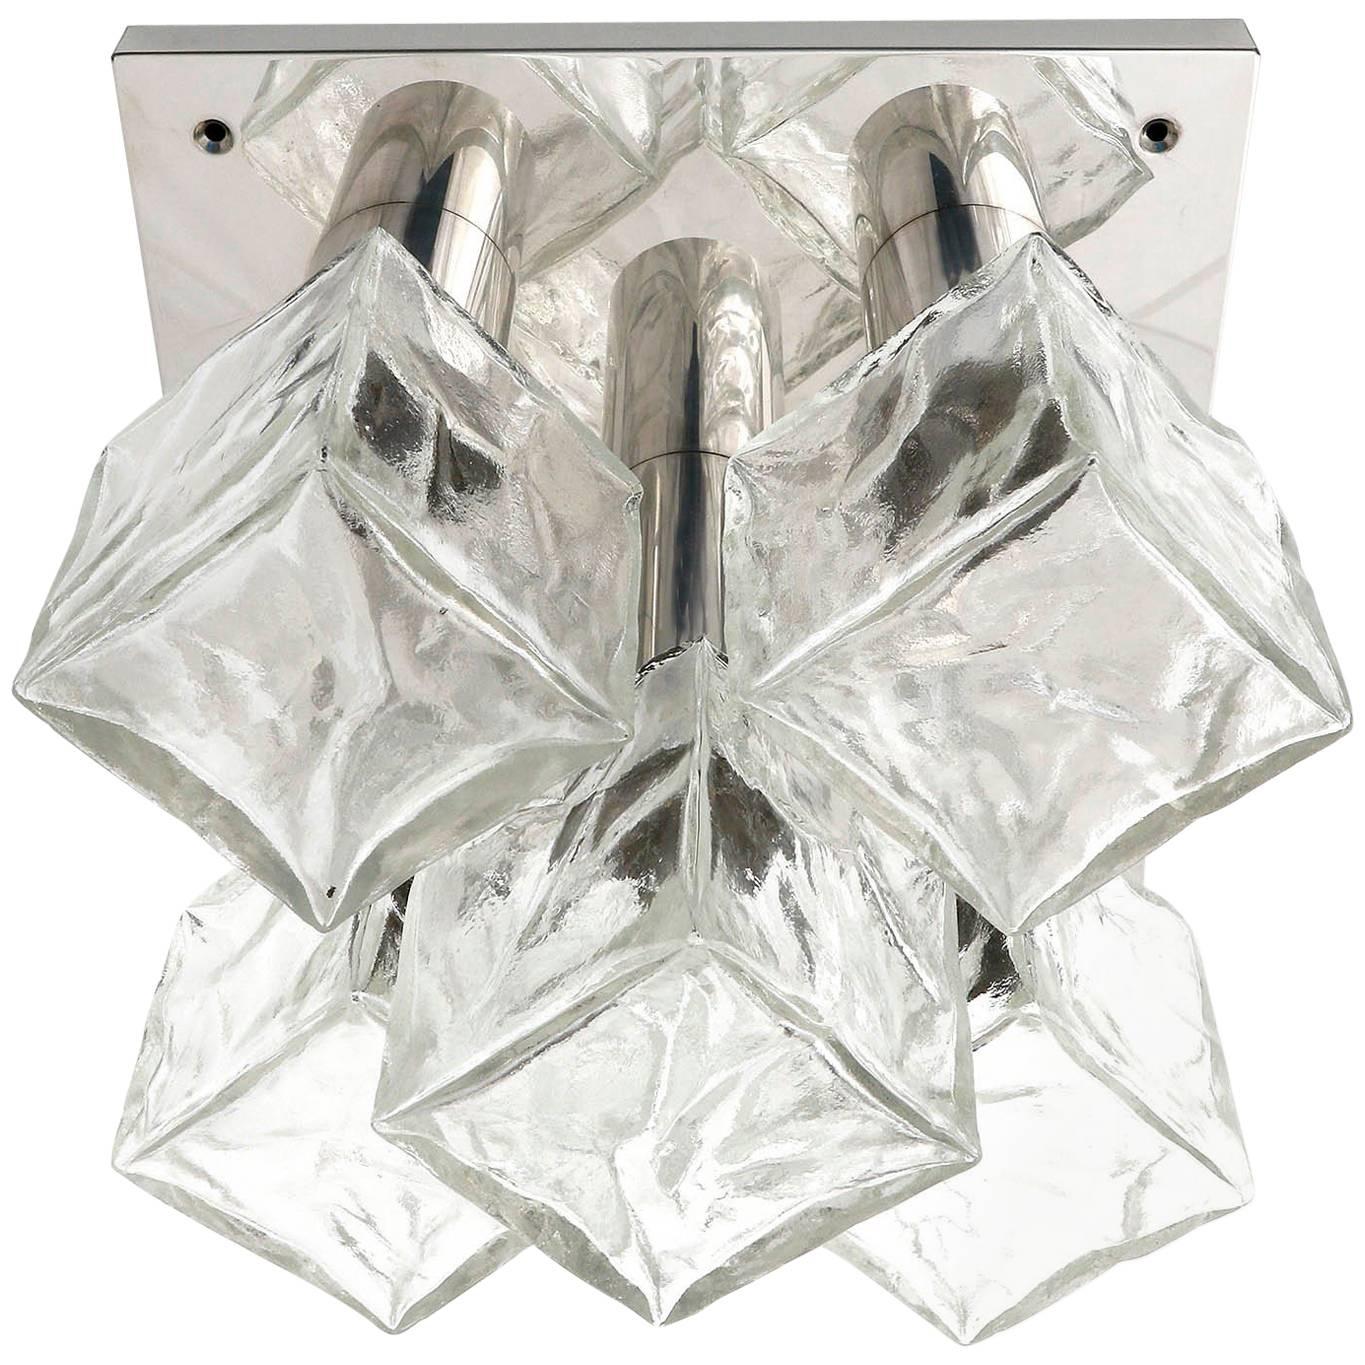 One of Six Modulare Square Kalmar 'Cubus' Flush Mount Lights or Sconces, 1970s For Sale